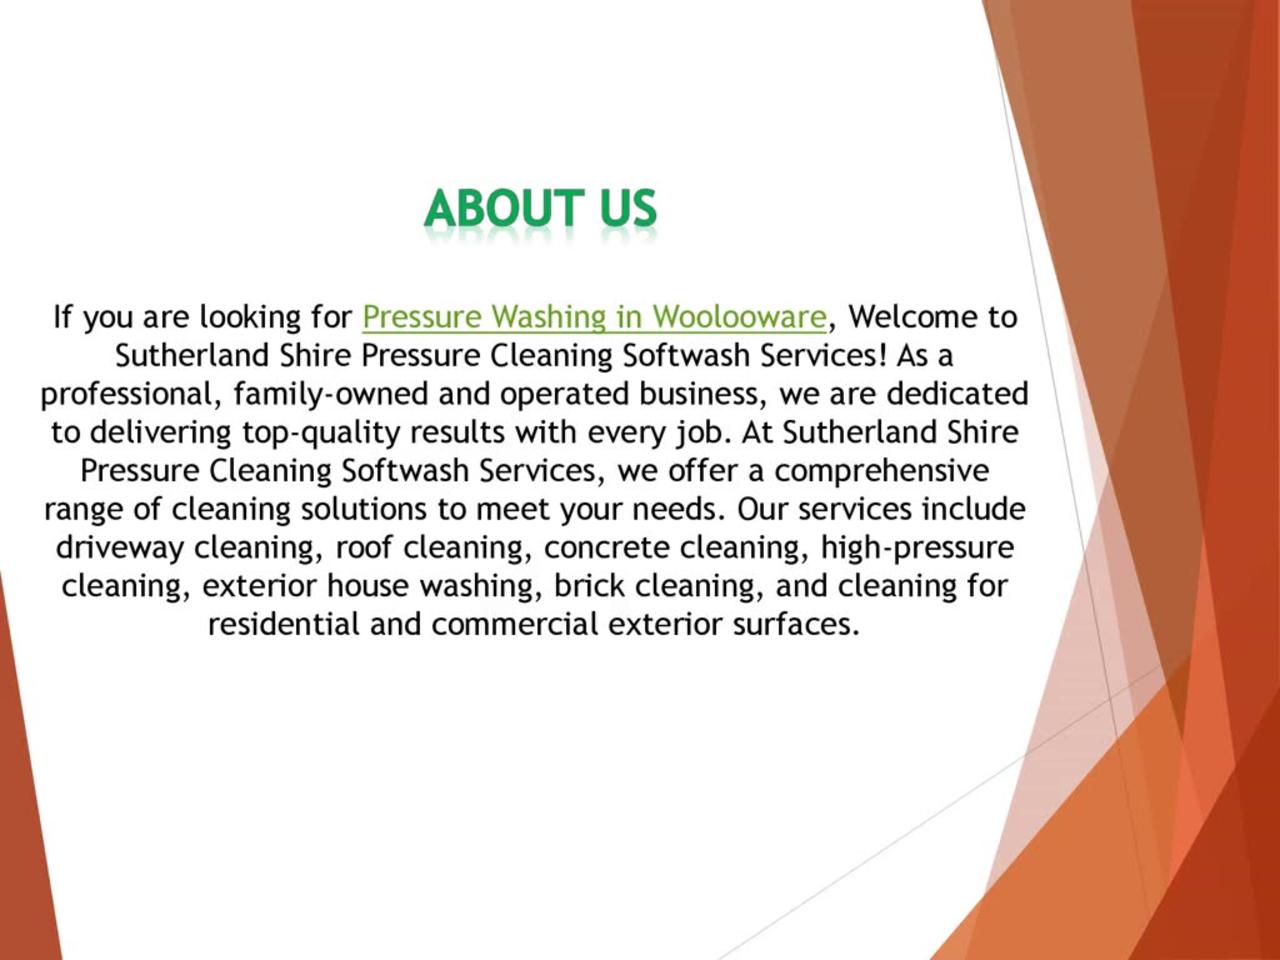 If you are looking for Pressure Washing in Woolooware